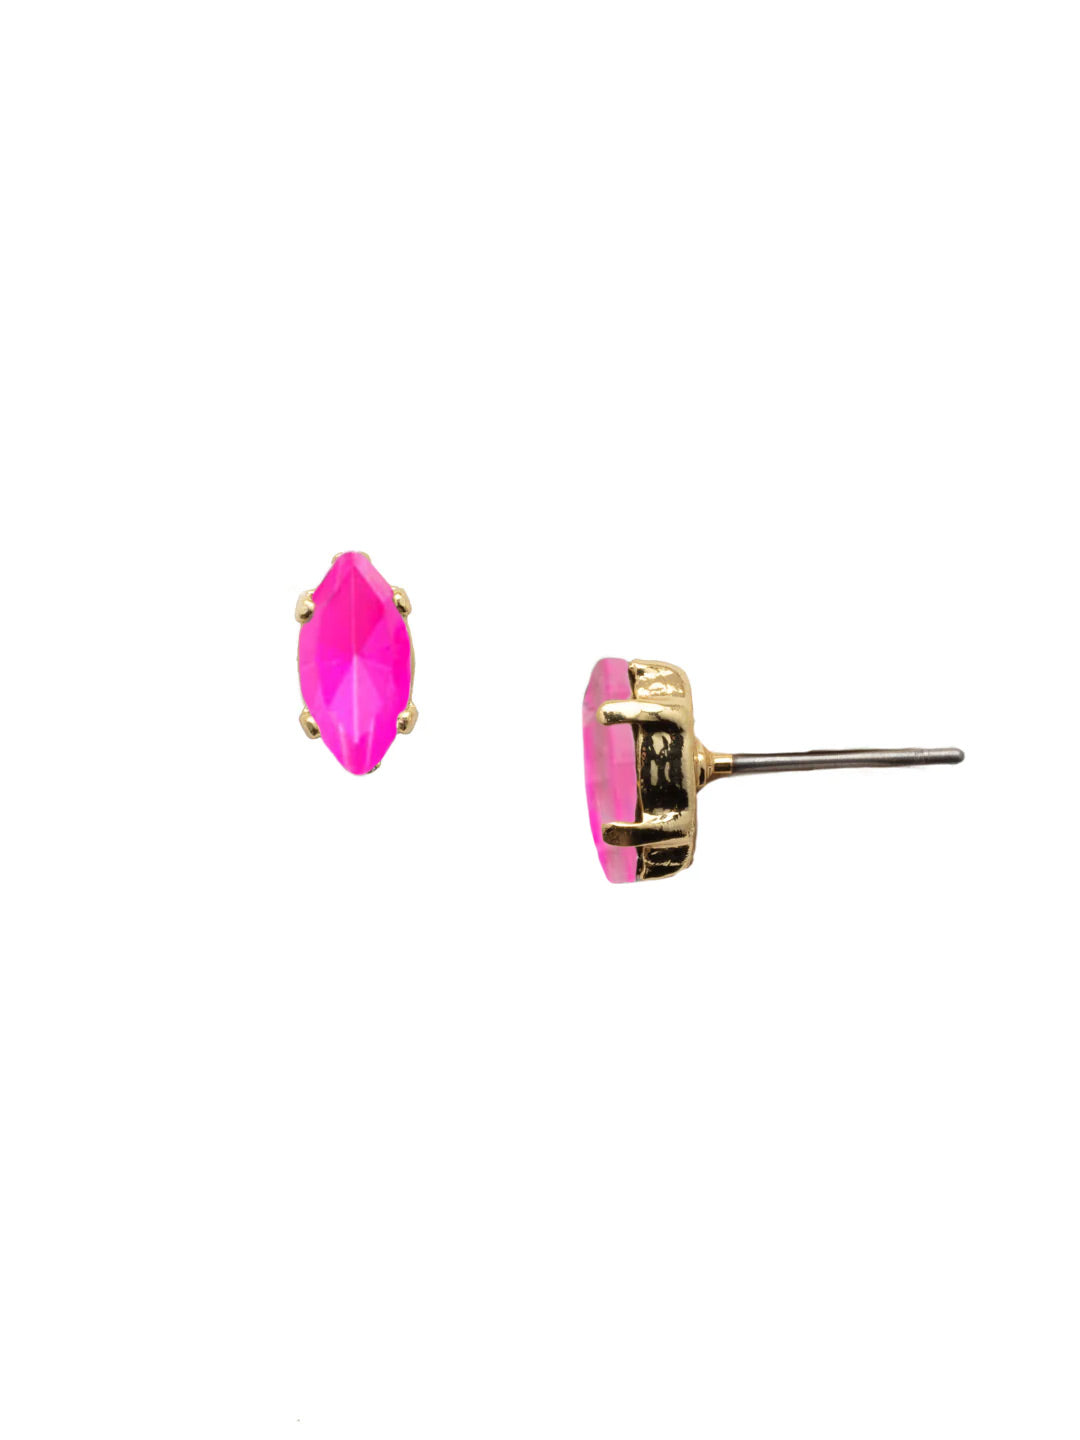 Clarissa Stud Earrings - EEP4BGWDW - <p>The Clarissa Stud Earring is for the lover of classics with a twist. Simple sparkling crystals get an oomph from the navette shape. From Sorrelli's Wild Watermelon collection in our Bright Gold-tone finish.</p>